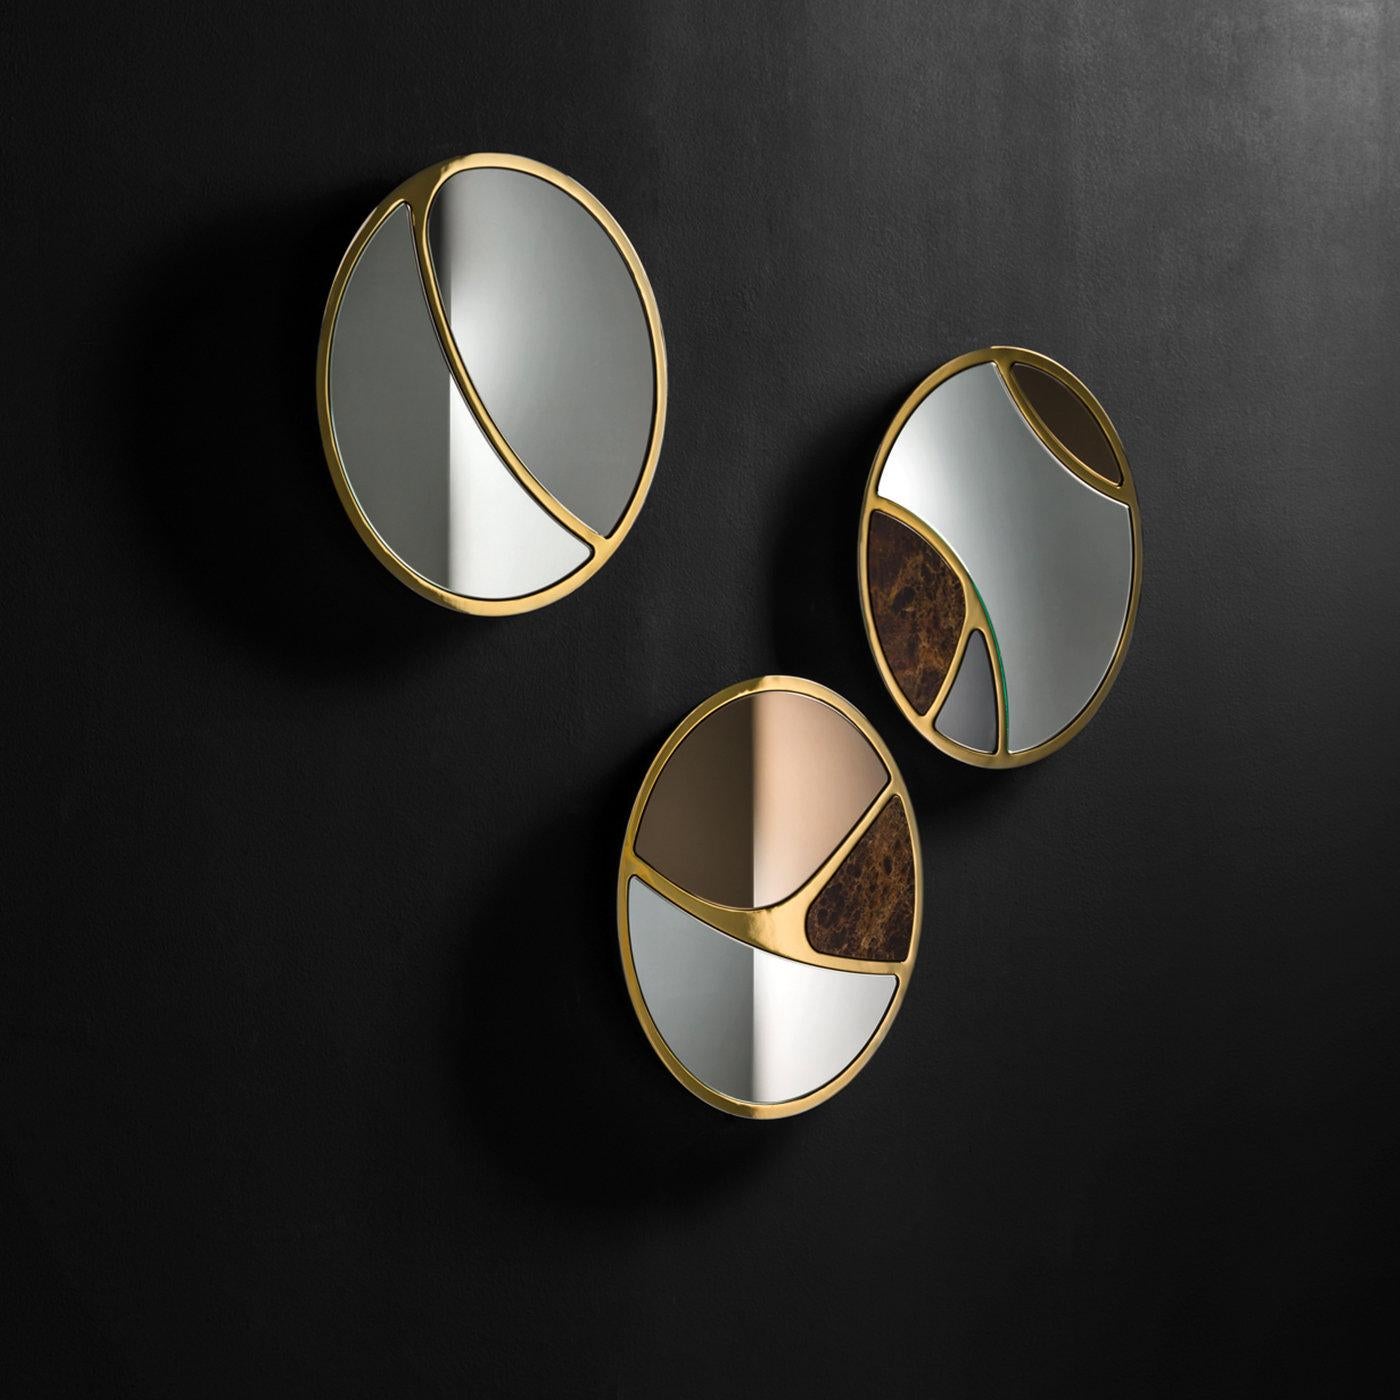 A masterpiece of sophistication, this mirror merges refined materials in a one-of-a-kind piece of decor. It boasts four sections (Emperador marble, smokey gray, bronze, and a clear) outlined by a laser-cut metal frame with a bronze finish elegantly